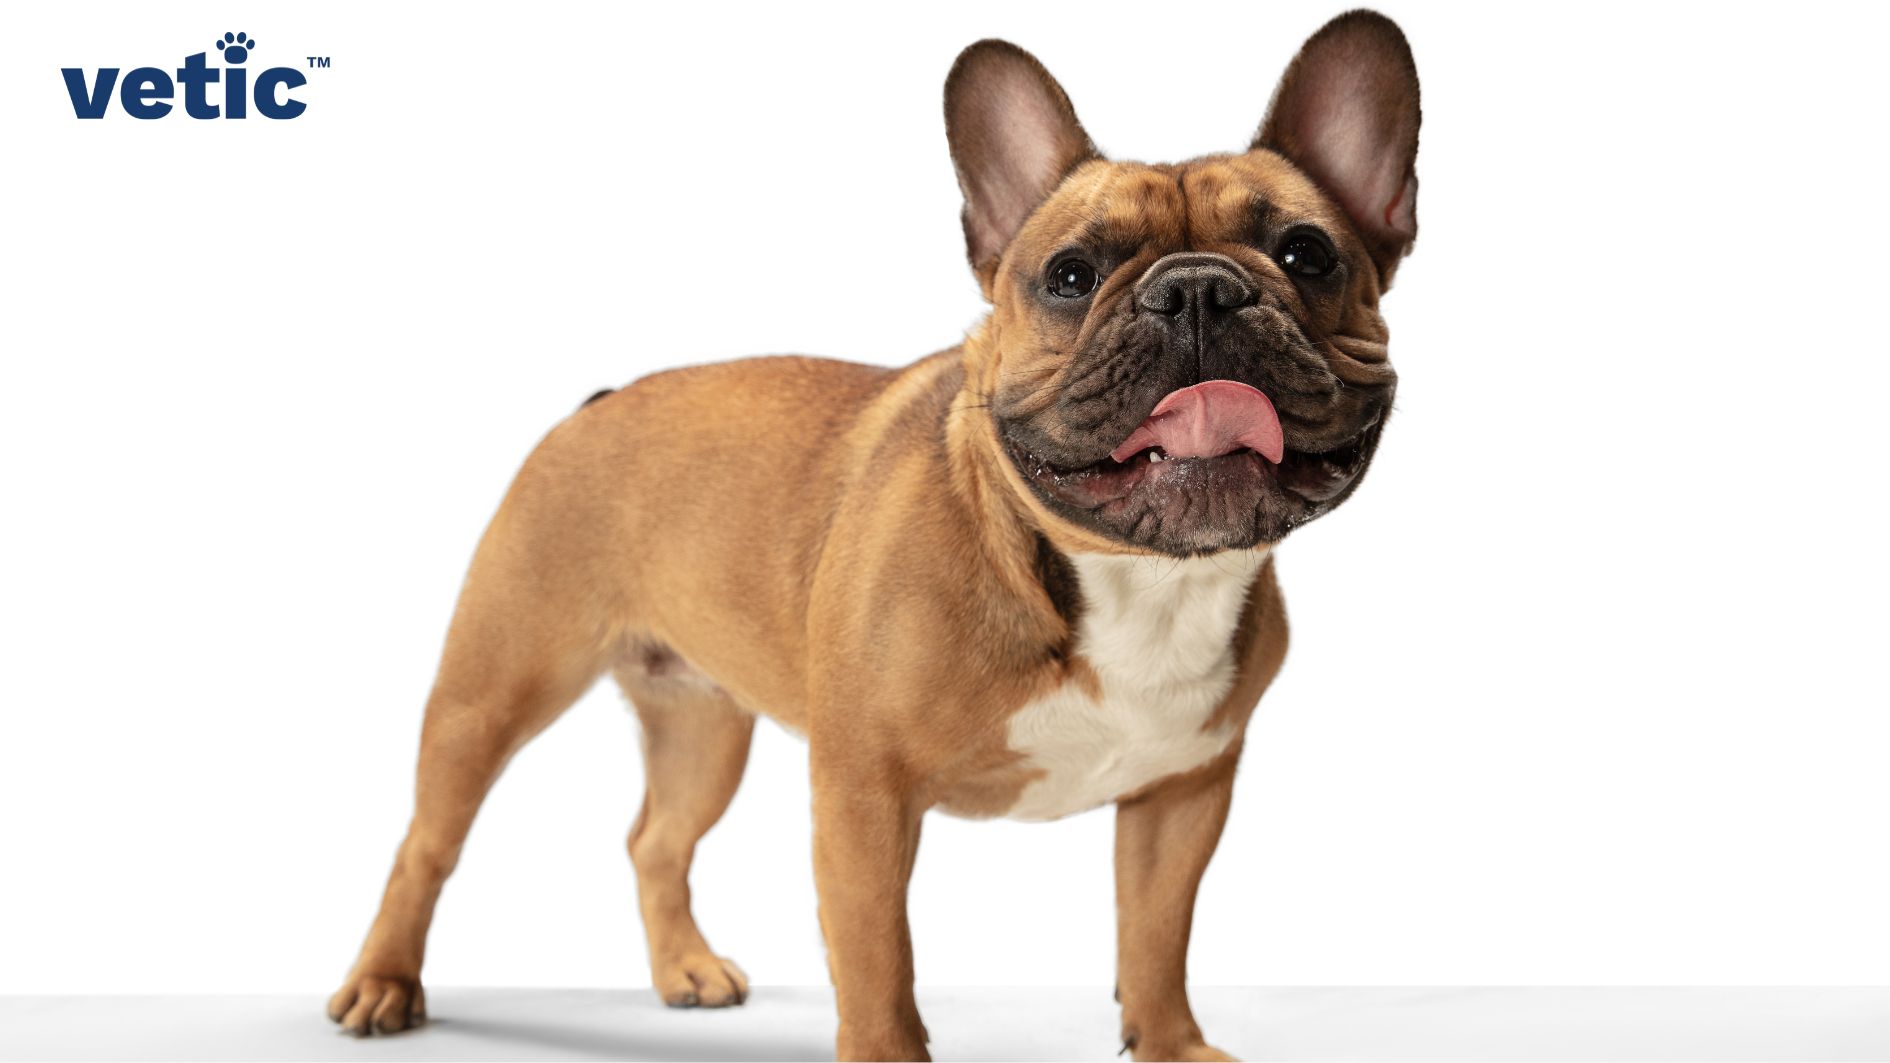 French bulldog complete frontal and side view. flat-faced breed breathing with its tongue out.